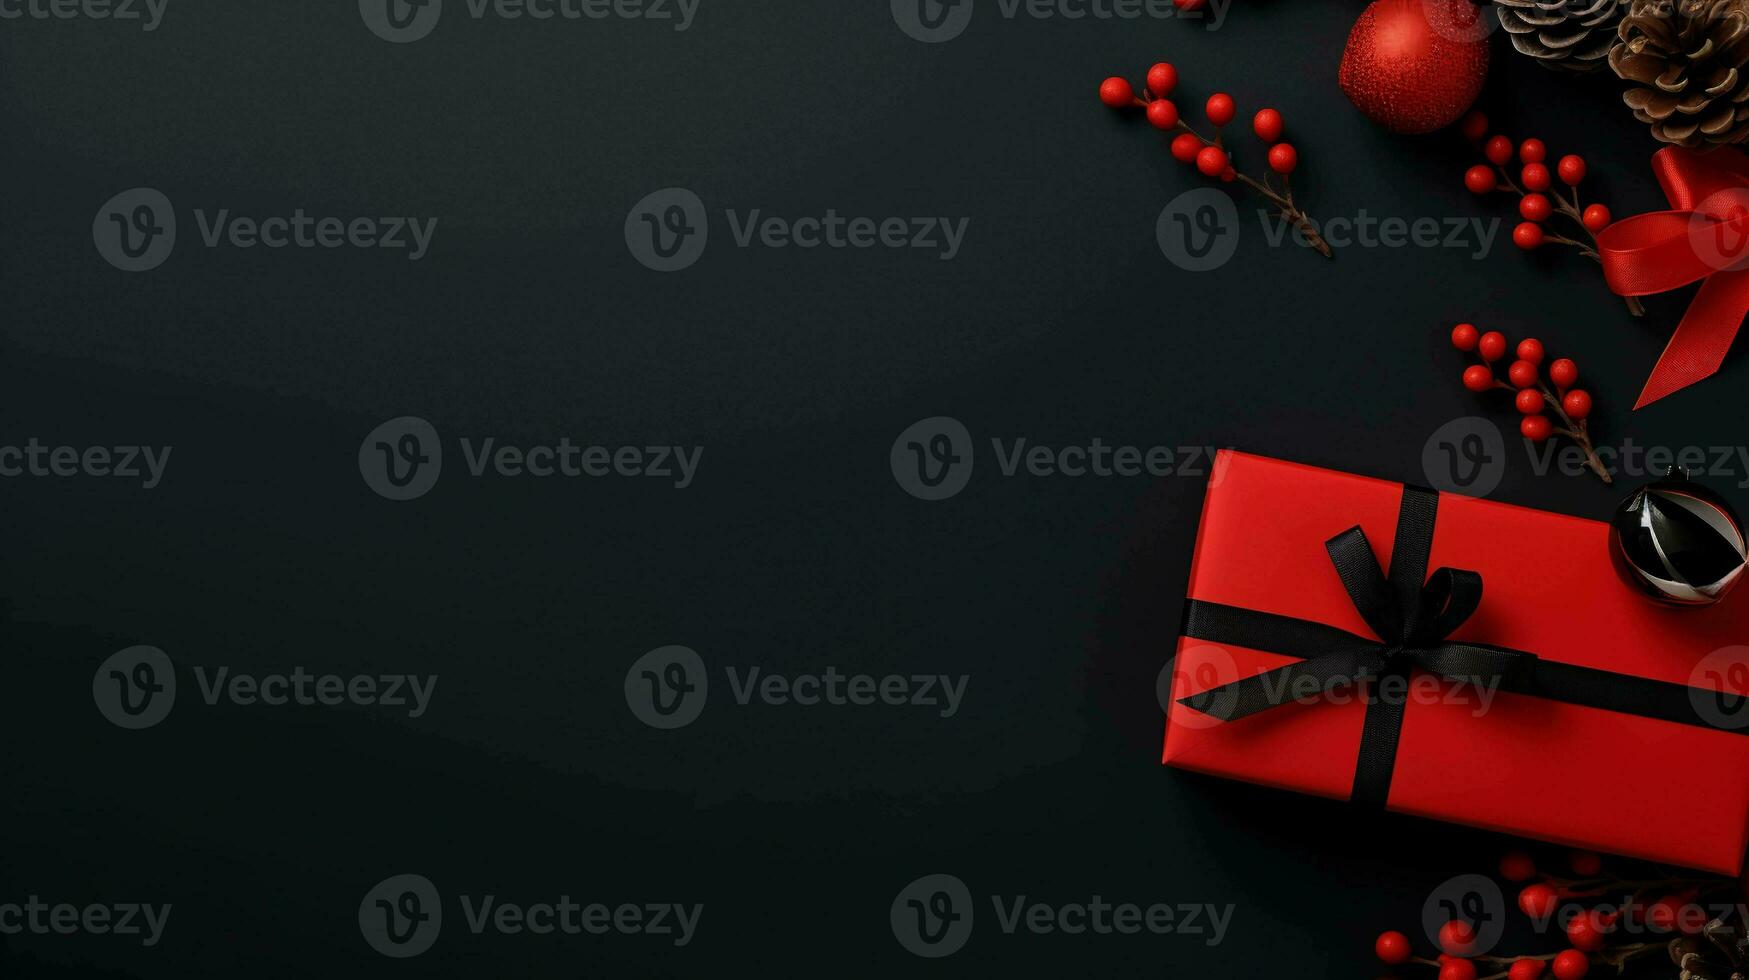 Sleek Black Friday. Bold red and black contrast with vouchers, discounts, and gifts photo